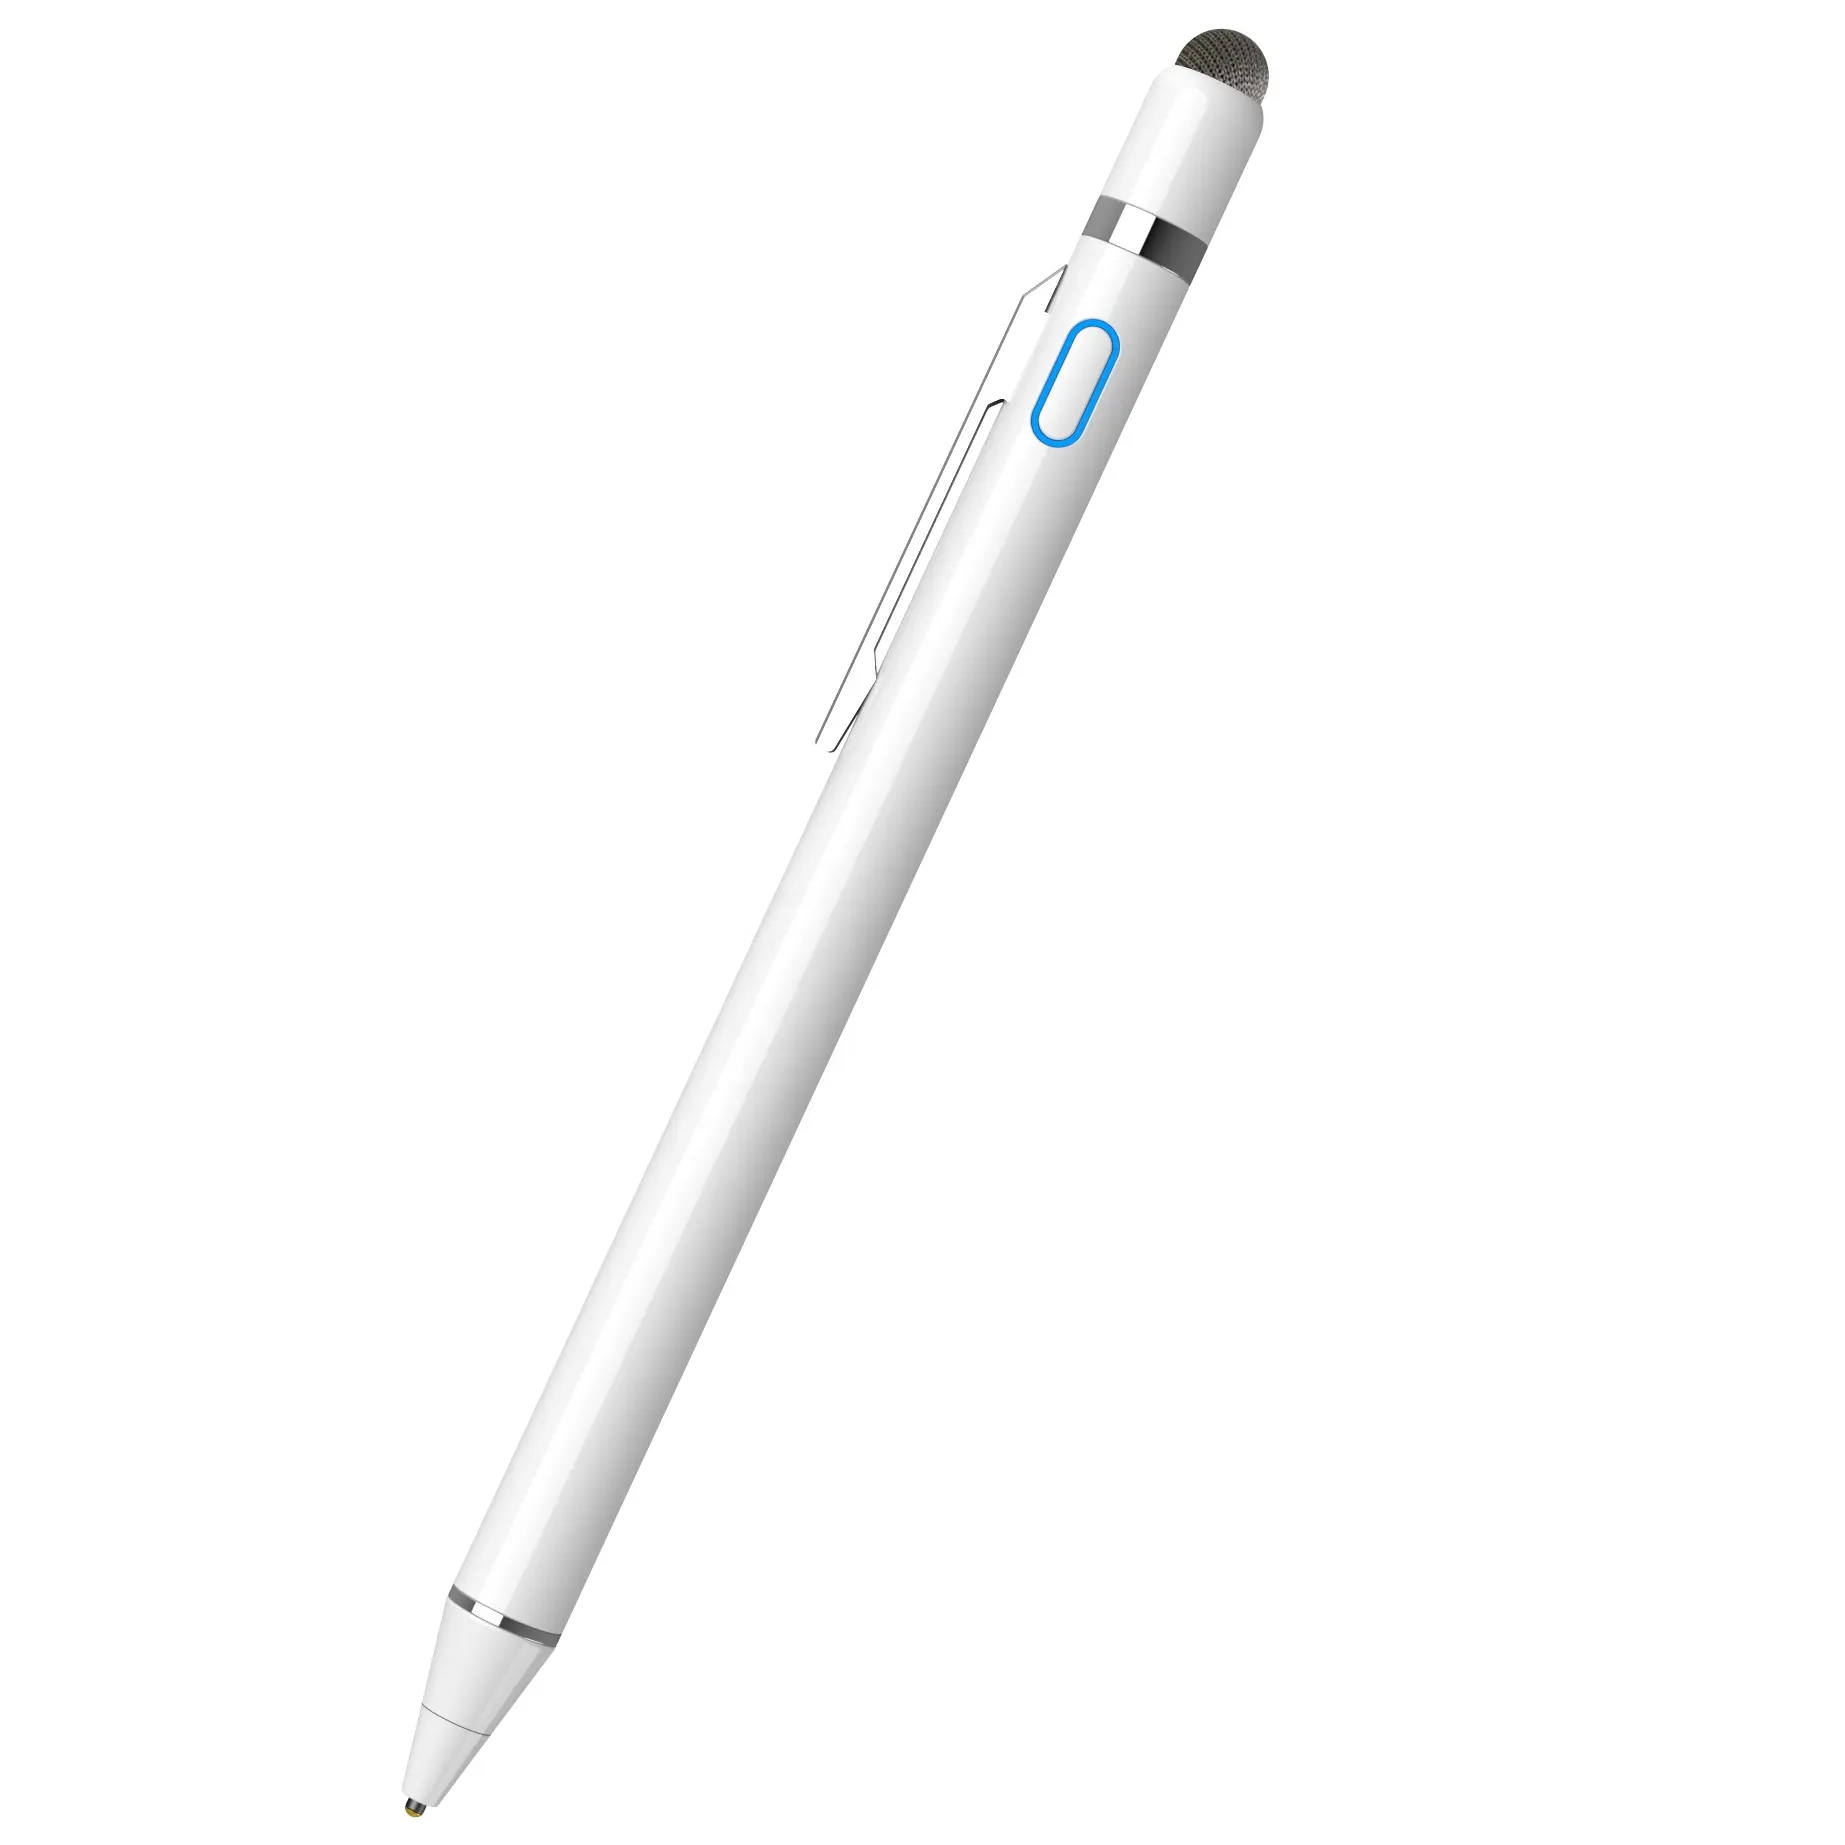 Custom small universal stylus touch pen for microsoft surface pen smart phones/ipad/tablet